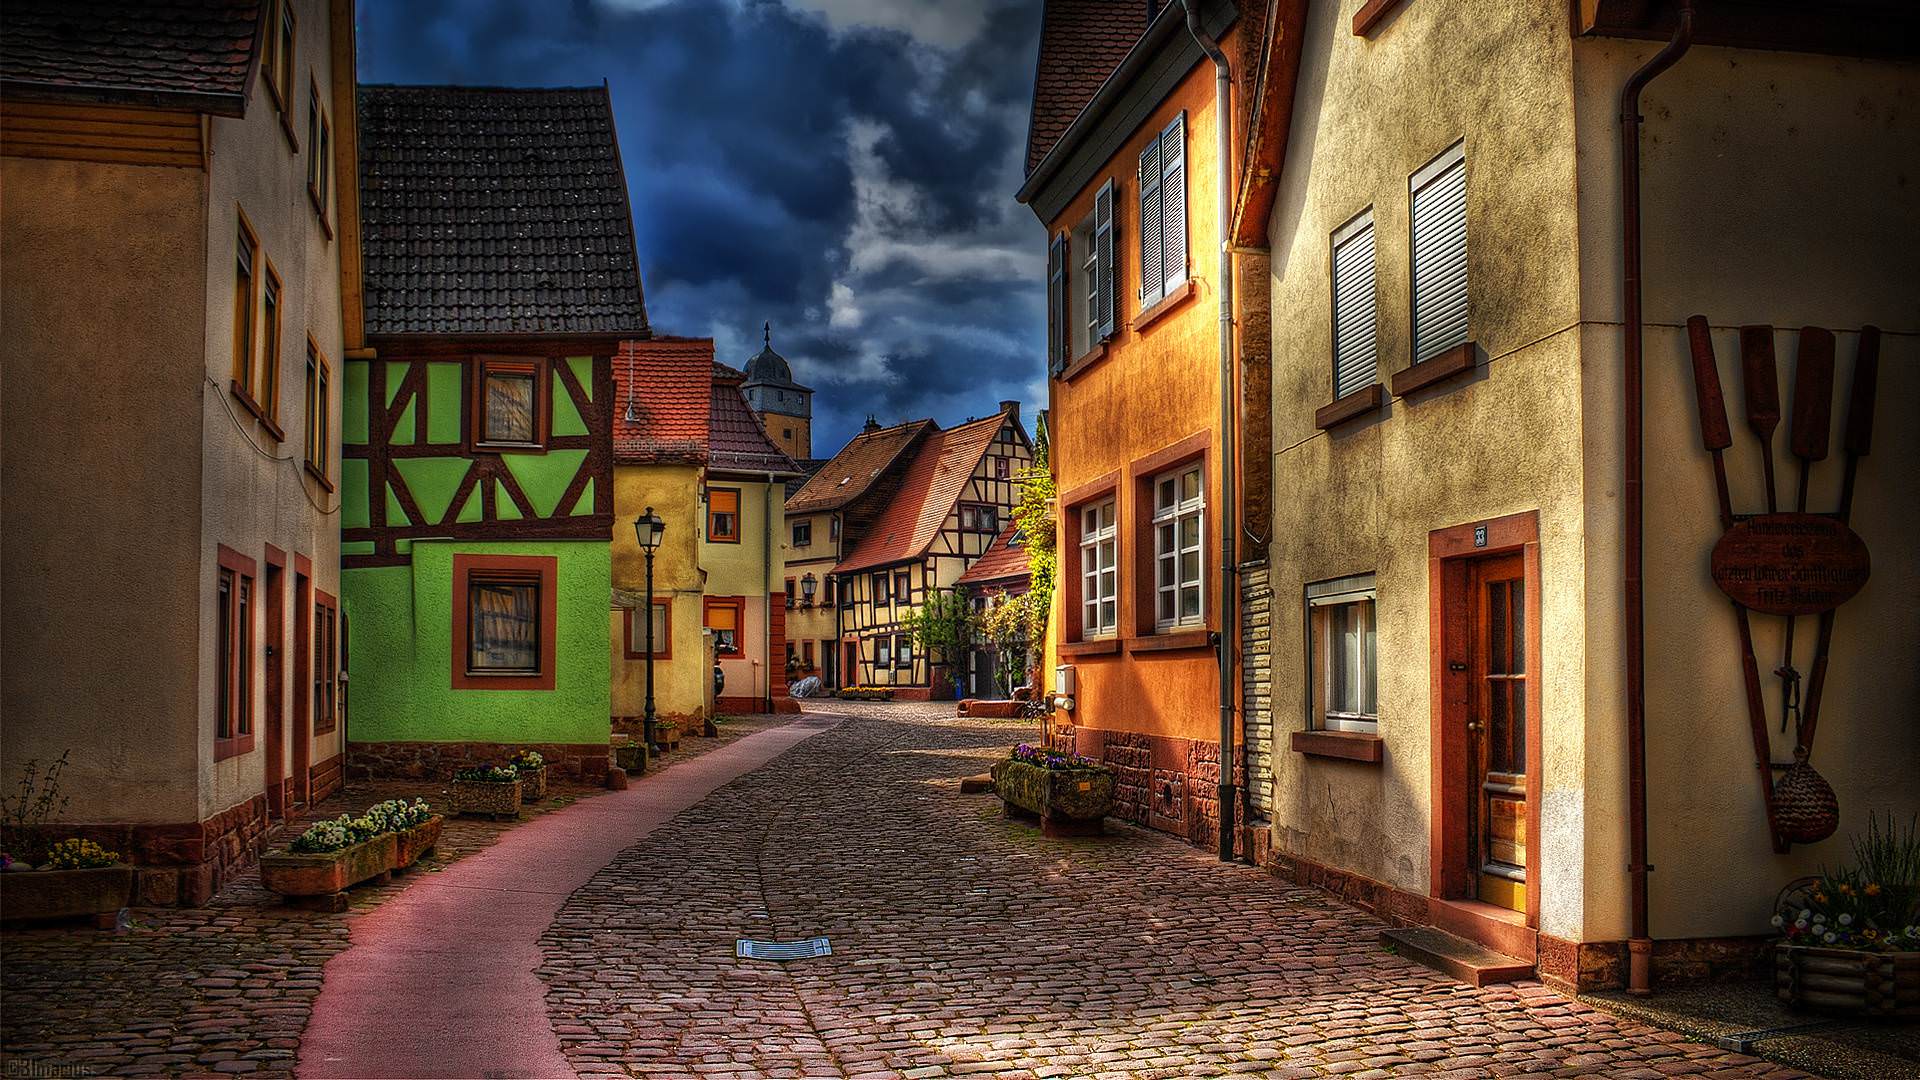 Old town street / 1920 x 1080 / Locality / Photography